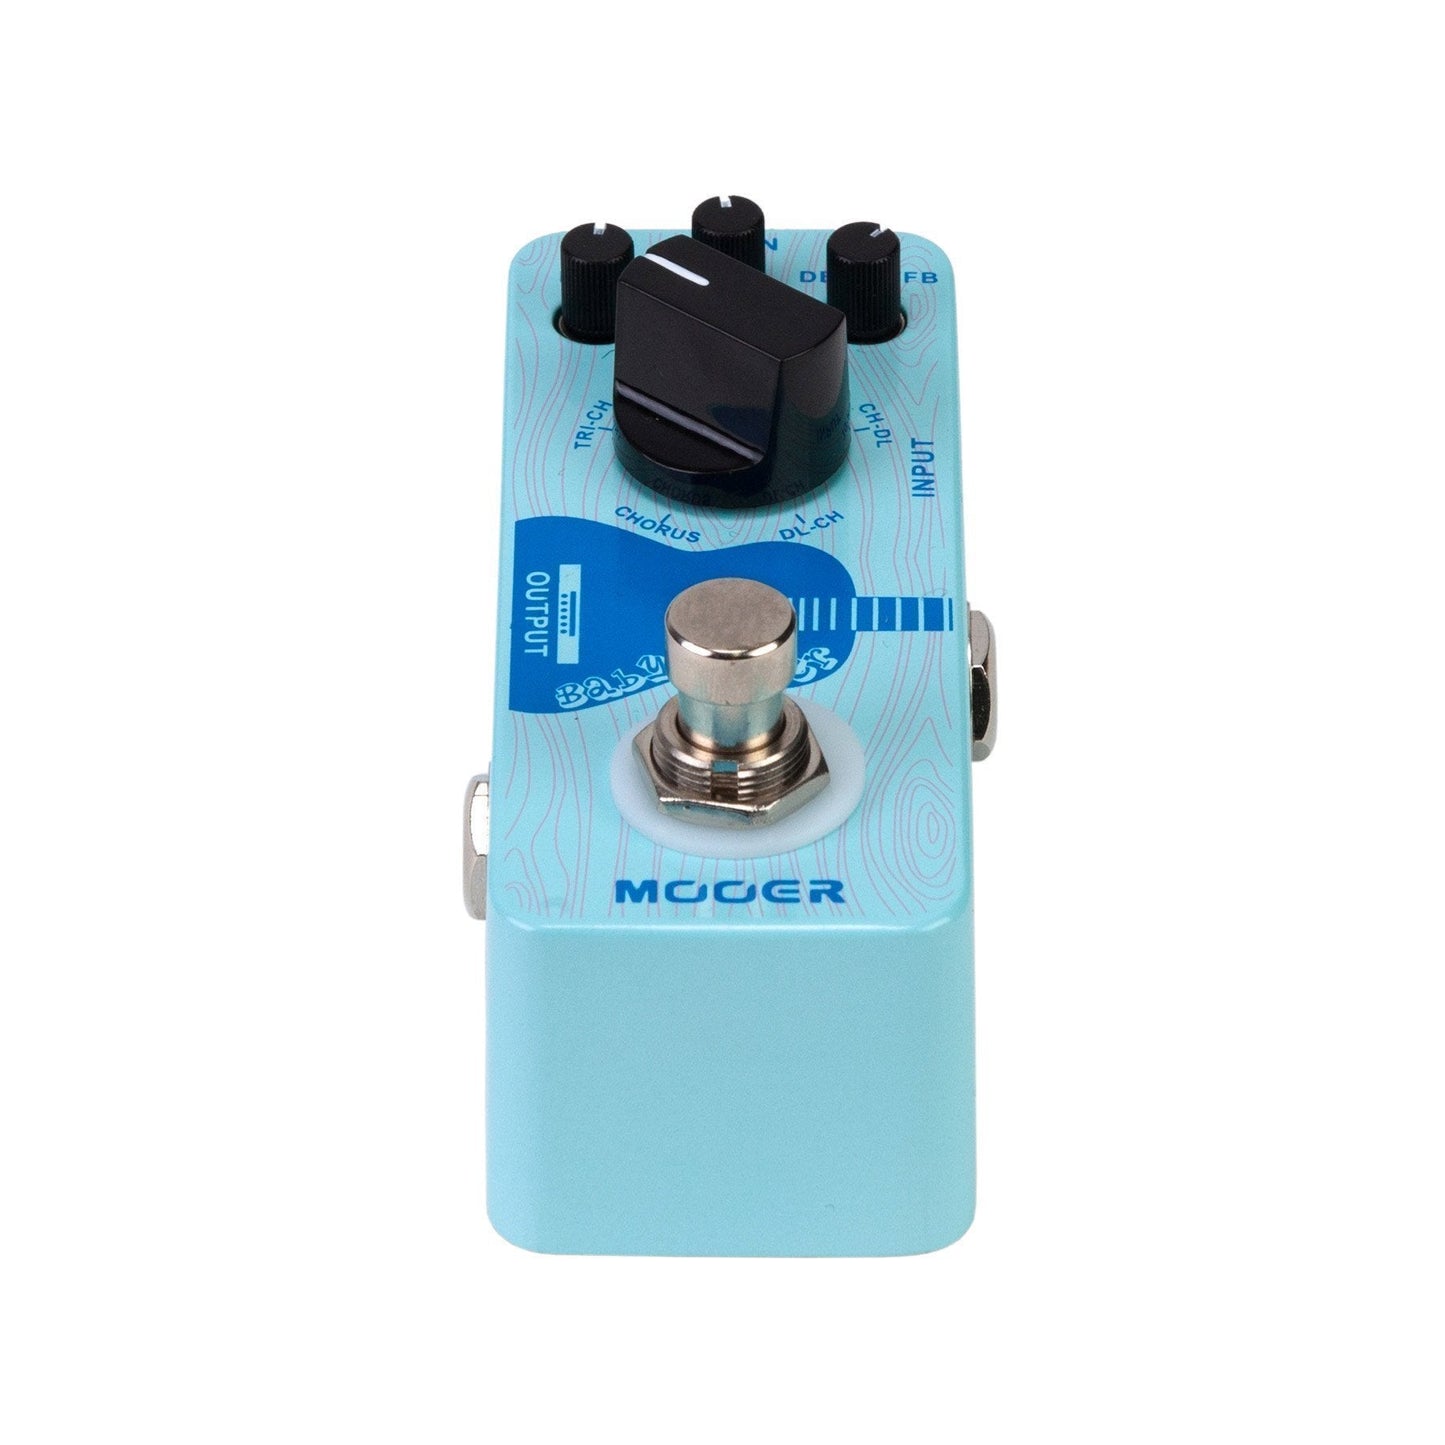 Mooer 'Baby Water' Acoustic Chorus & Delay Micro Guitar Effects Pedal